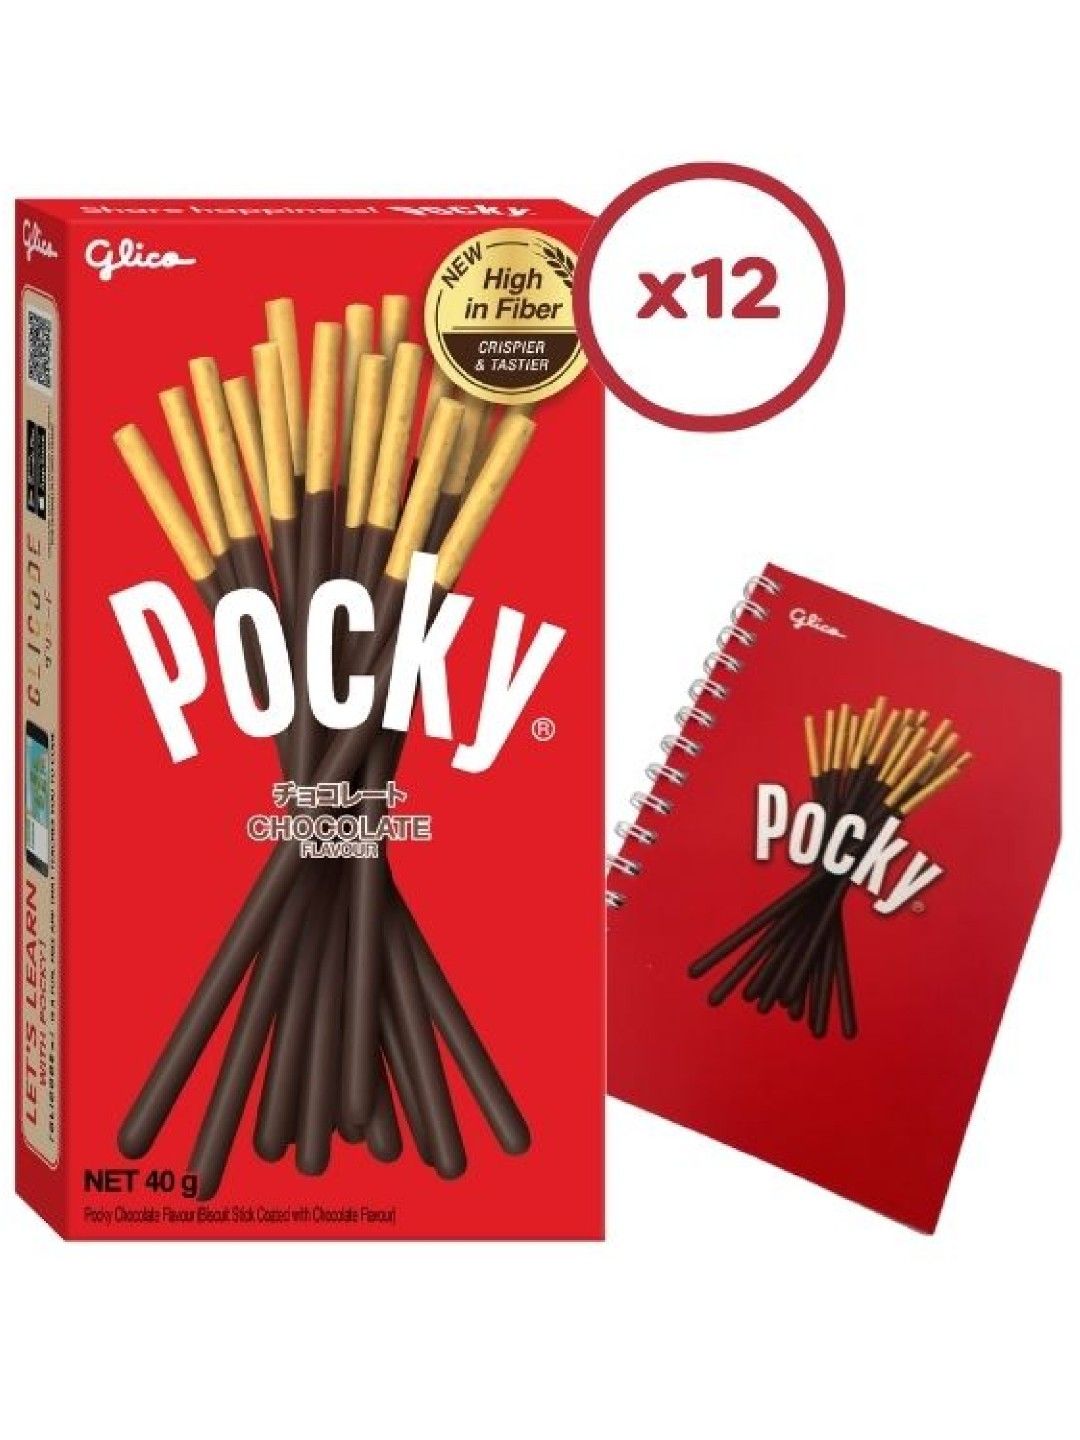 Pocky Chocolate Biscuit Sticks (Bundle of 12) with FREE Glico Notebook